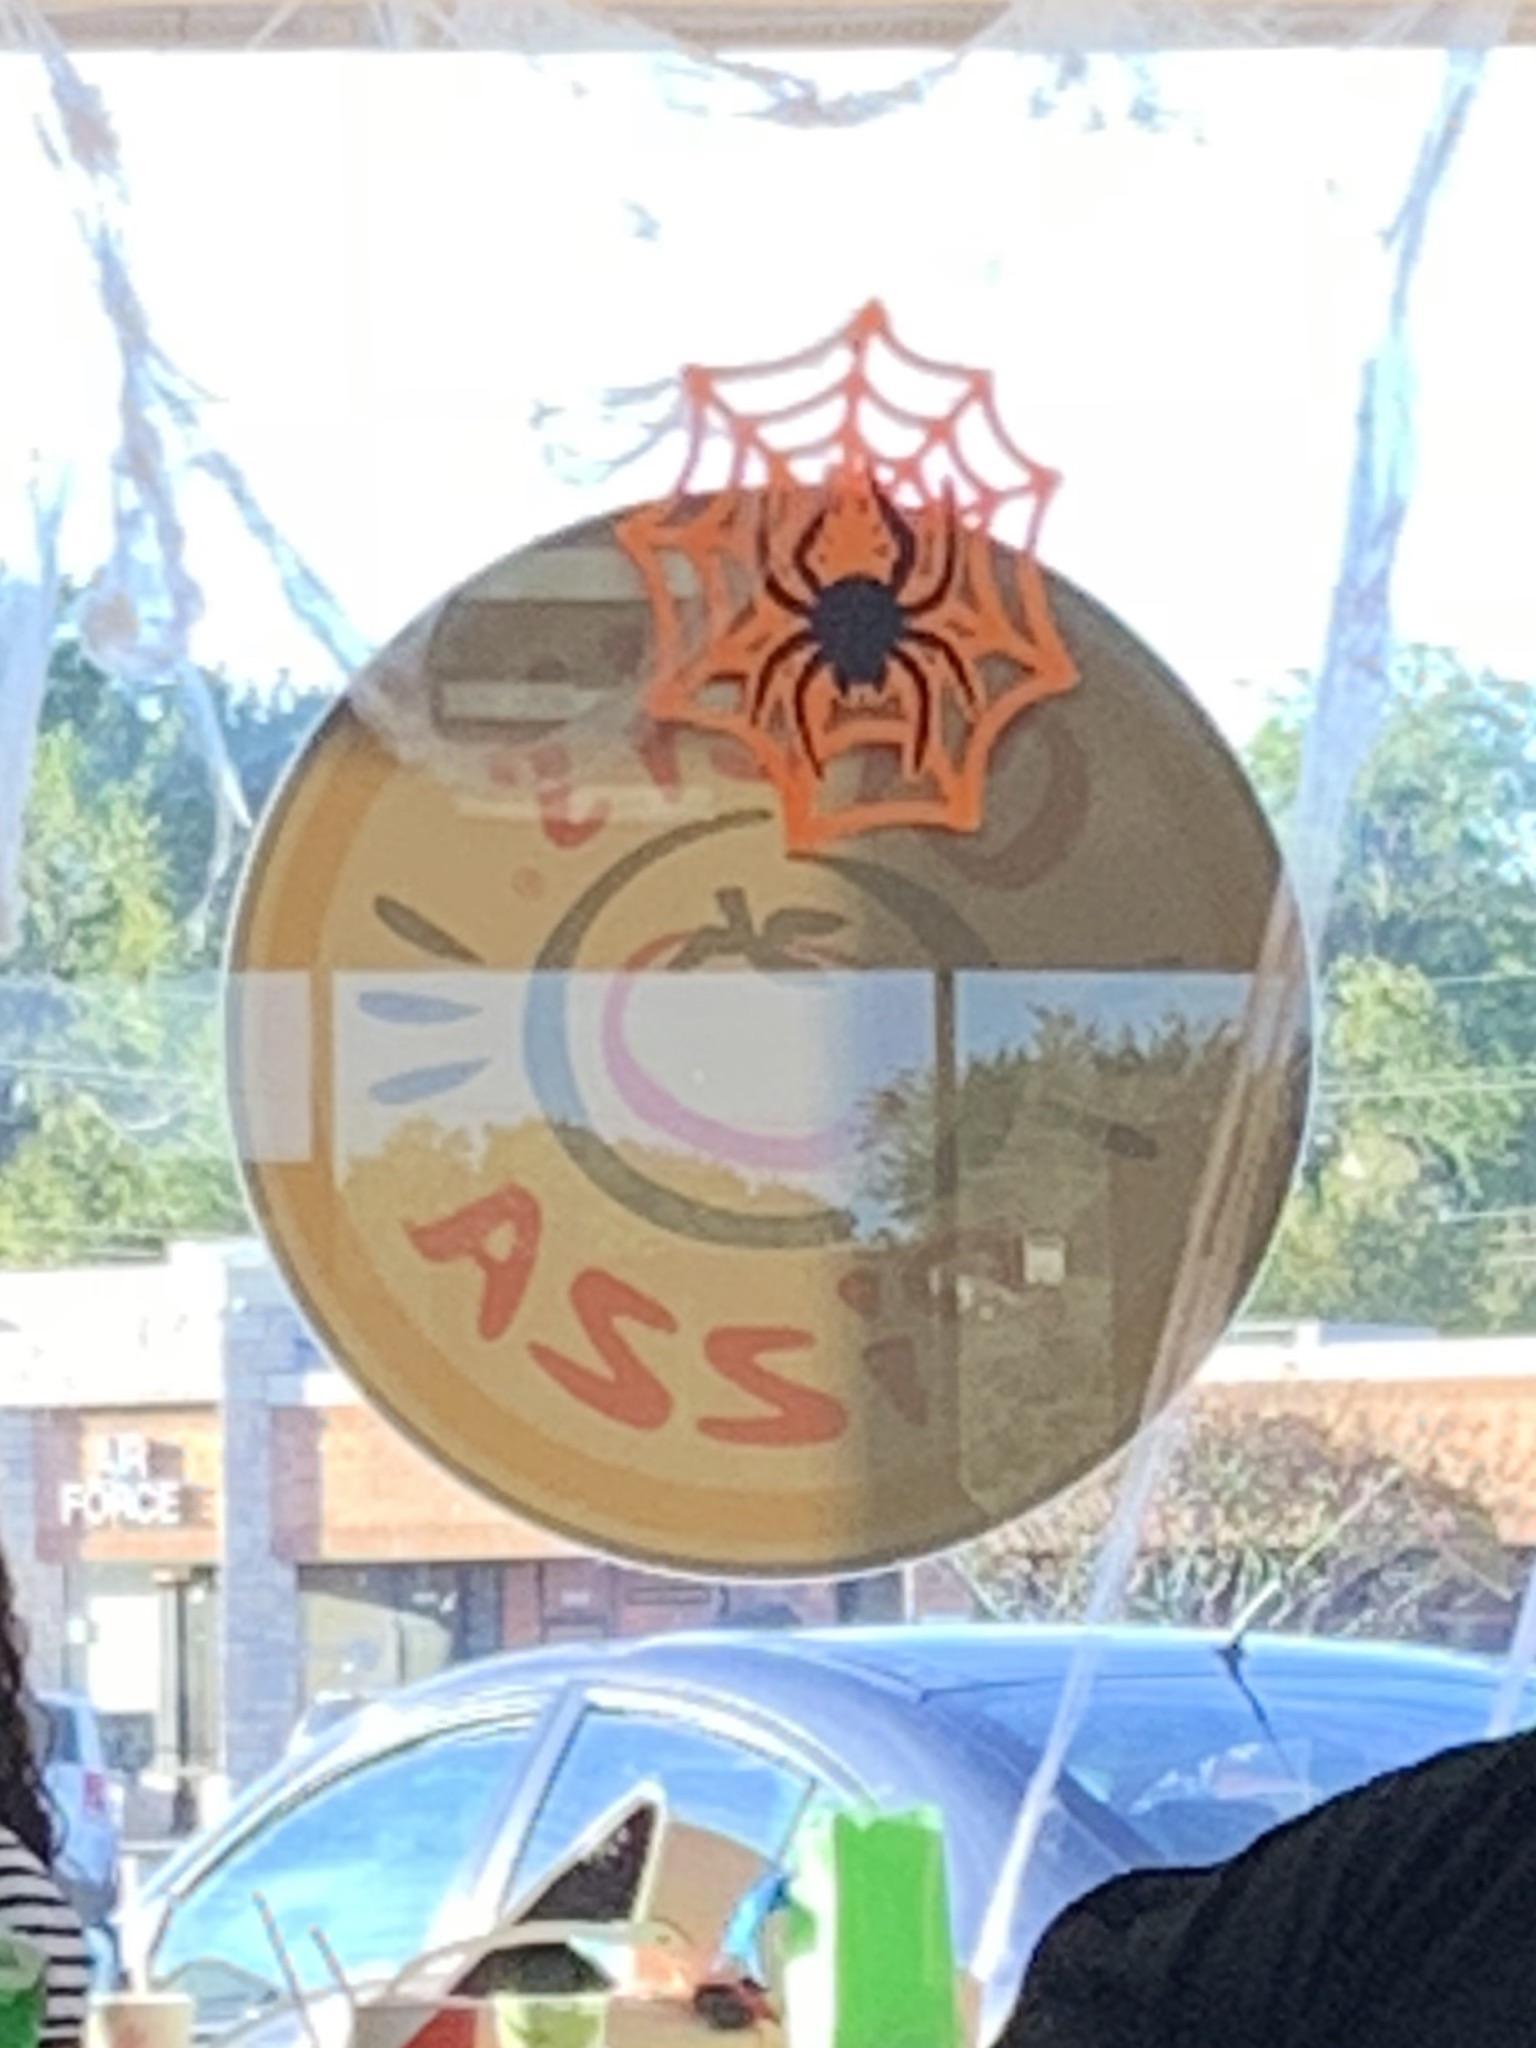 Cici's Pizza Logo - I think the Cici's Pizza logo is trying to tell me something : funny